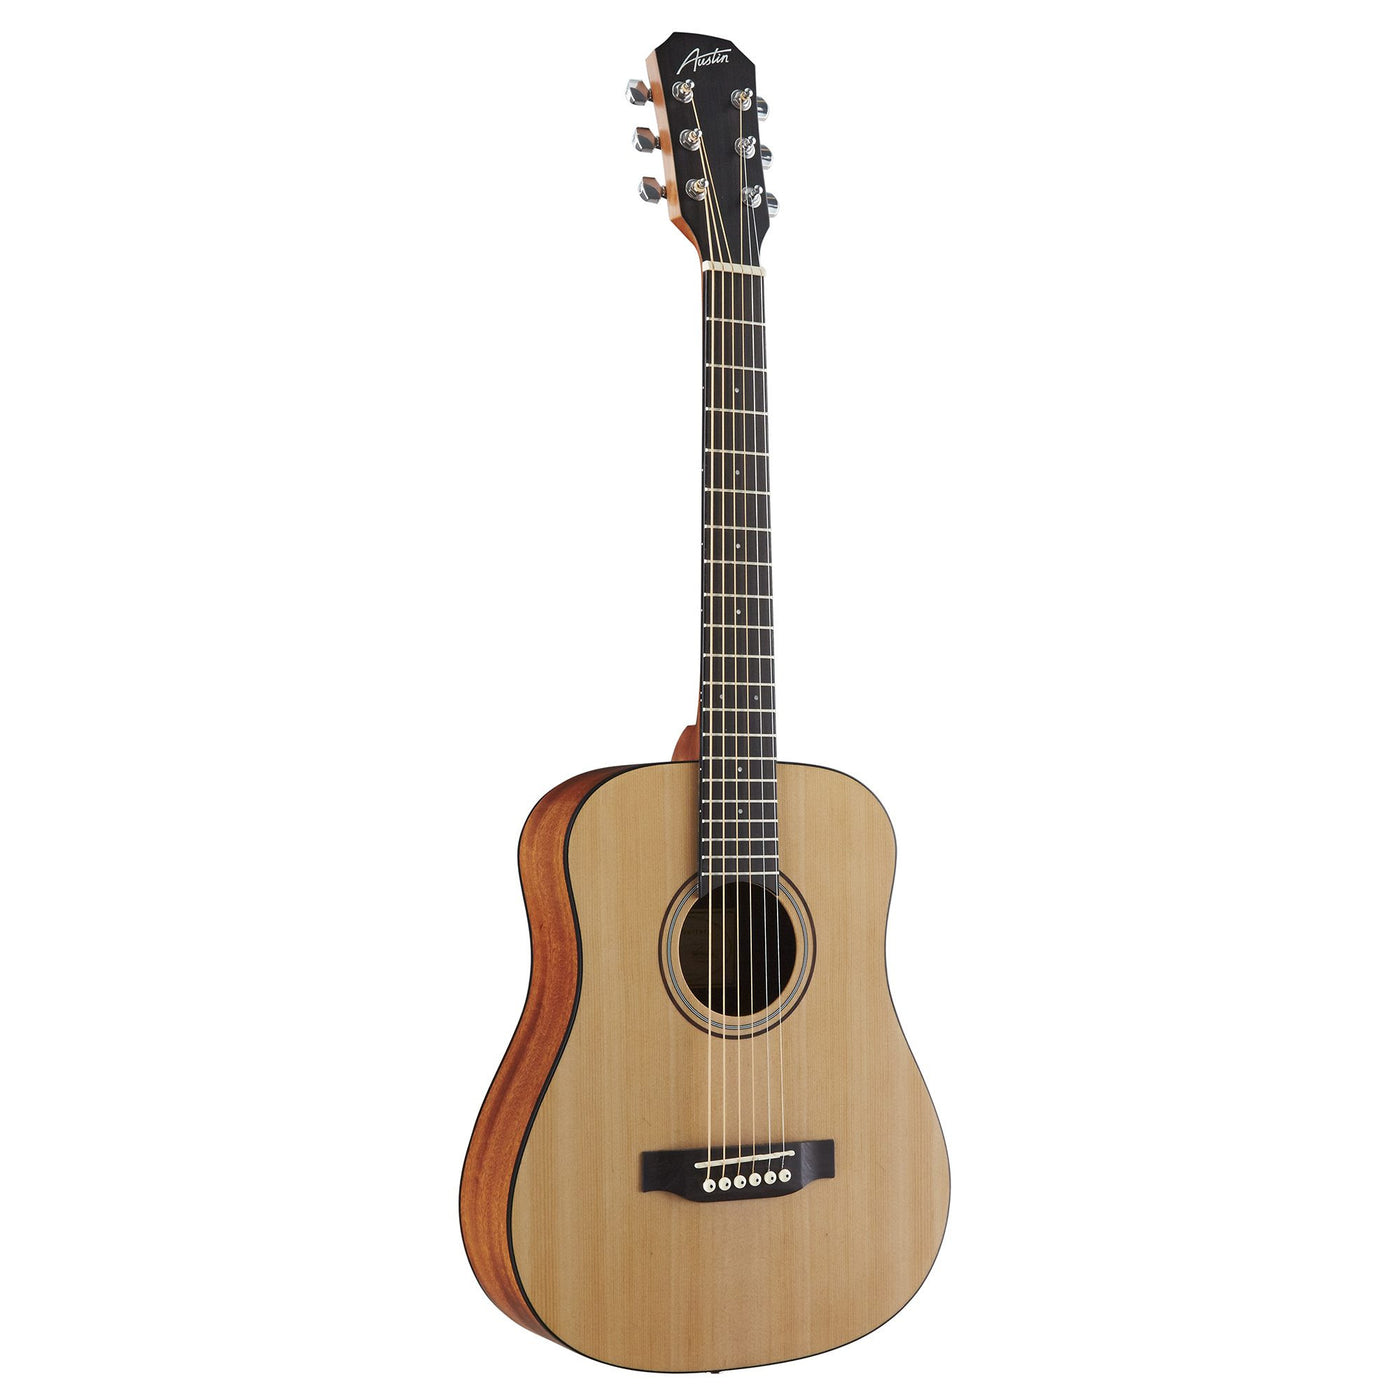 Austin Travel Size Dreadnought Acoustic Guitar, Satin Natural with Gig Bag